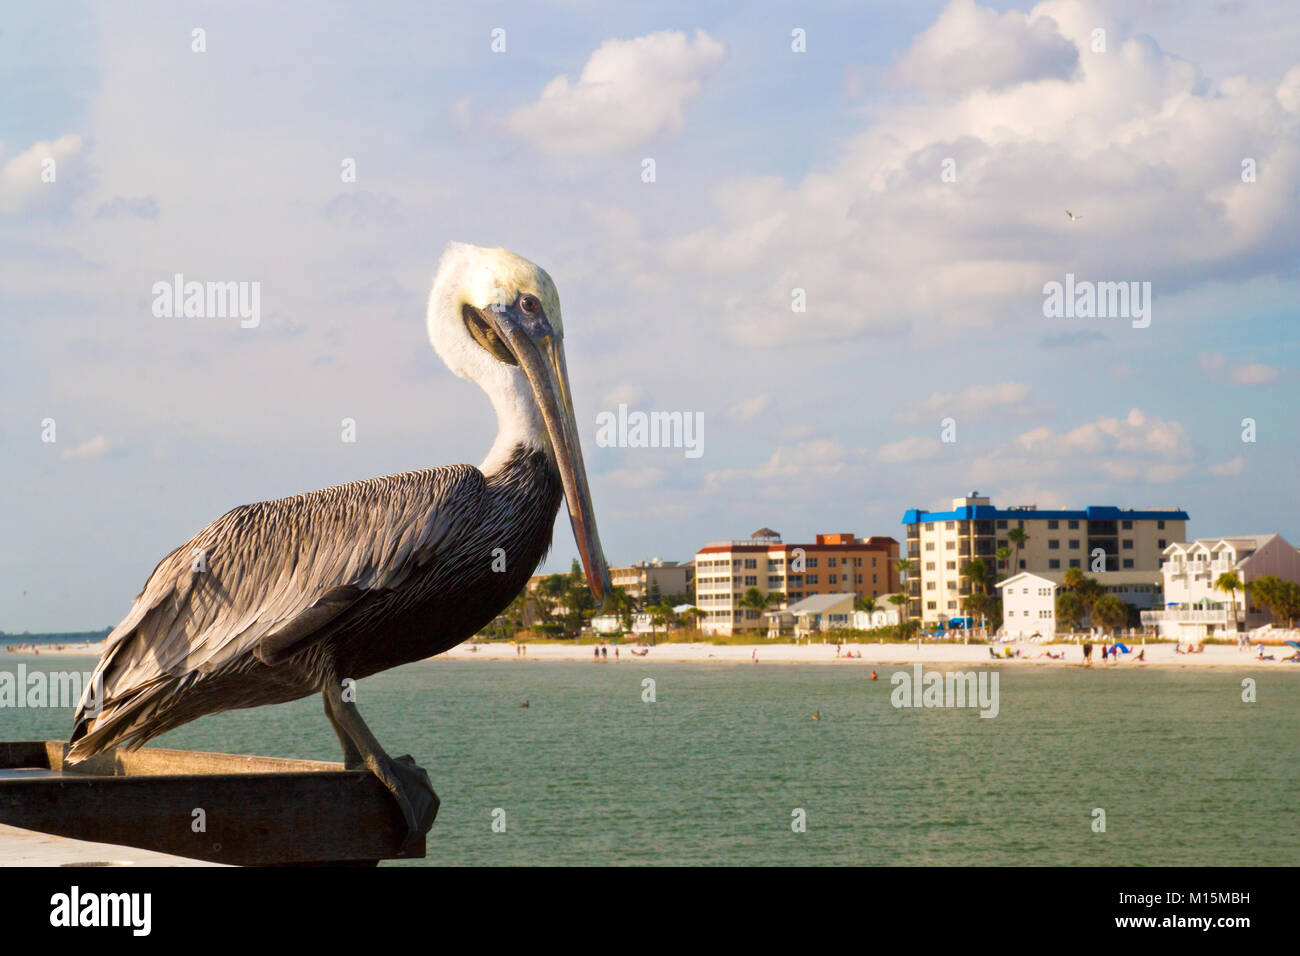 Pelican, sandy beach and hotels view in back, Fort Myers beach Florida, The brown pelican, North American bird animal of pelican family, Pelecanidae Stock Photo